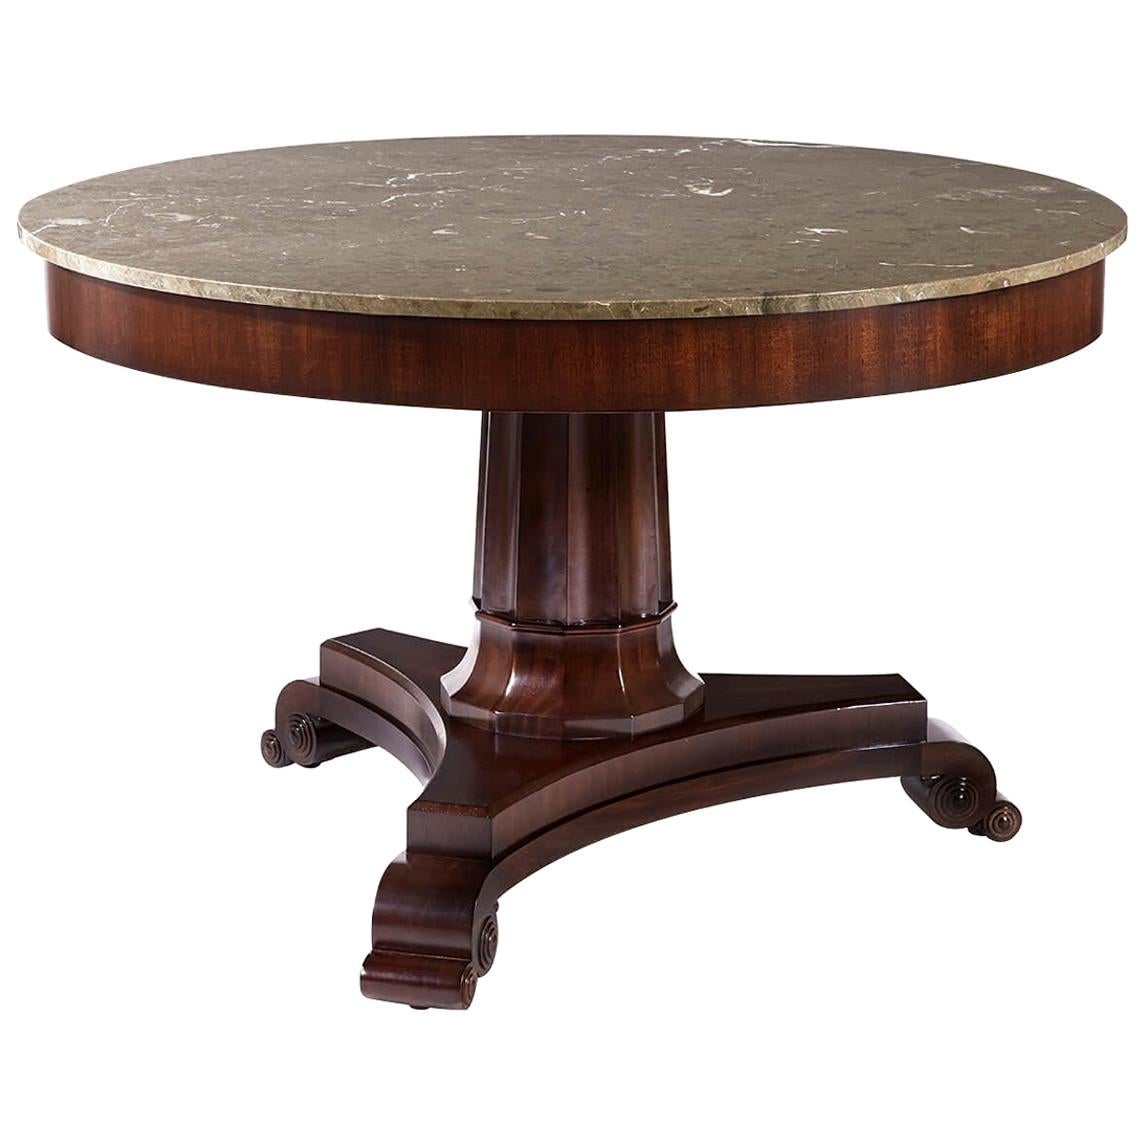 Classical Round Center Table For Sale